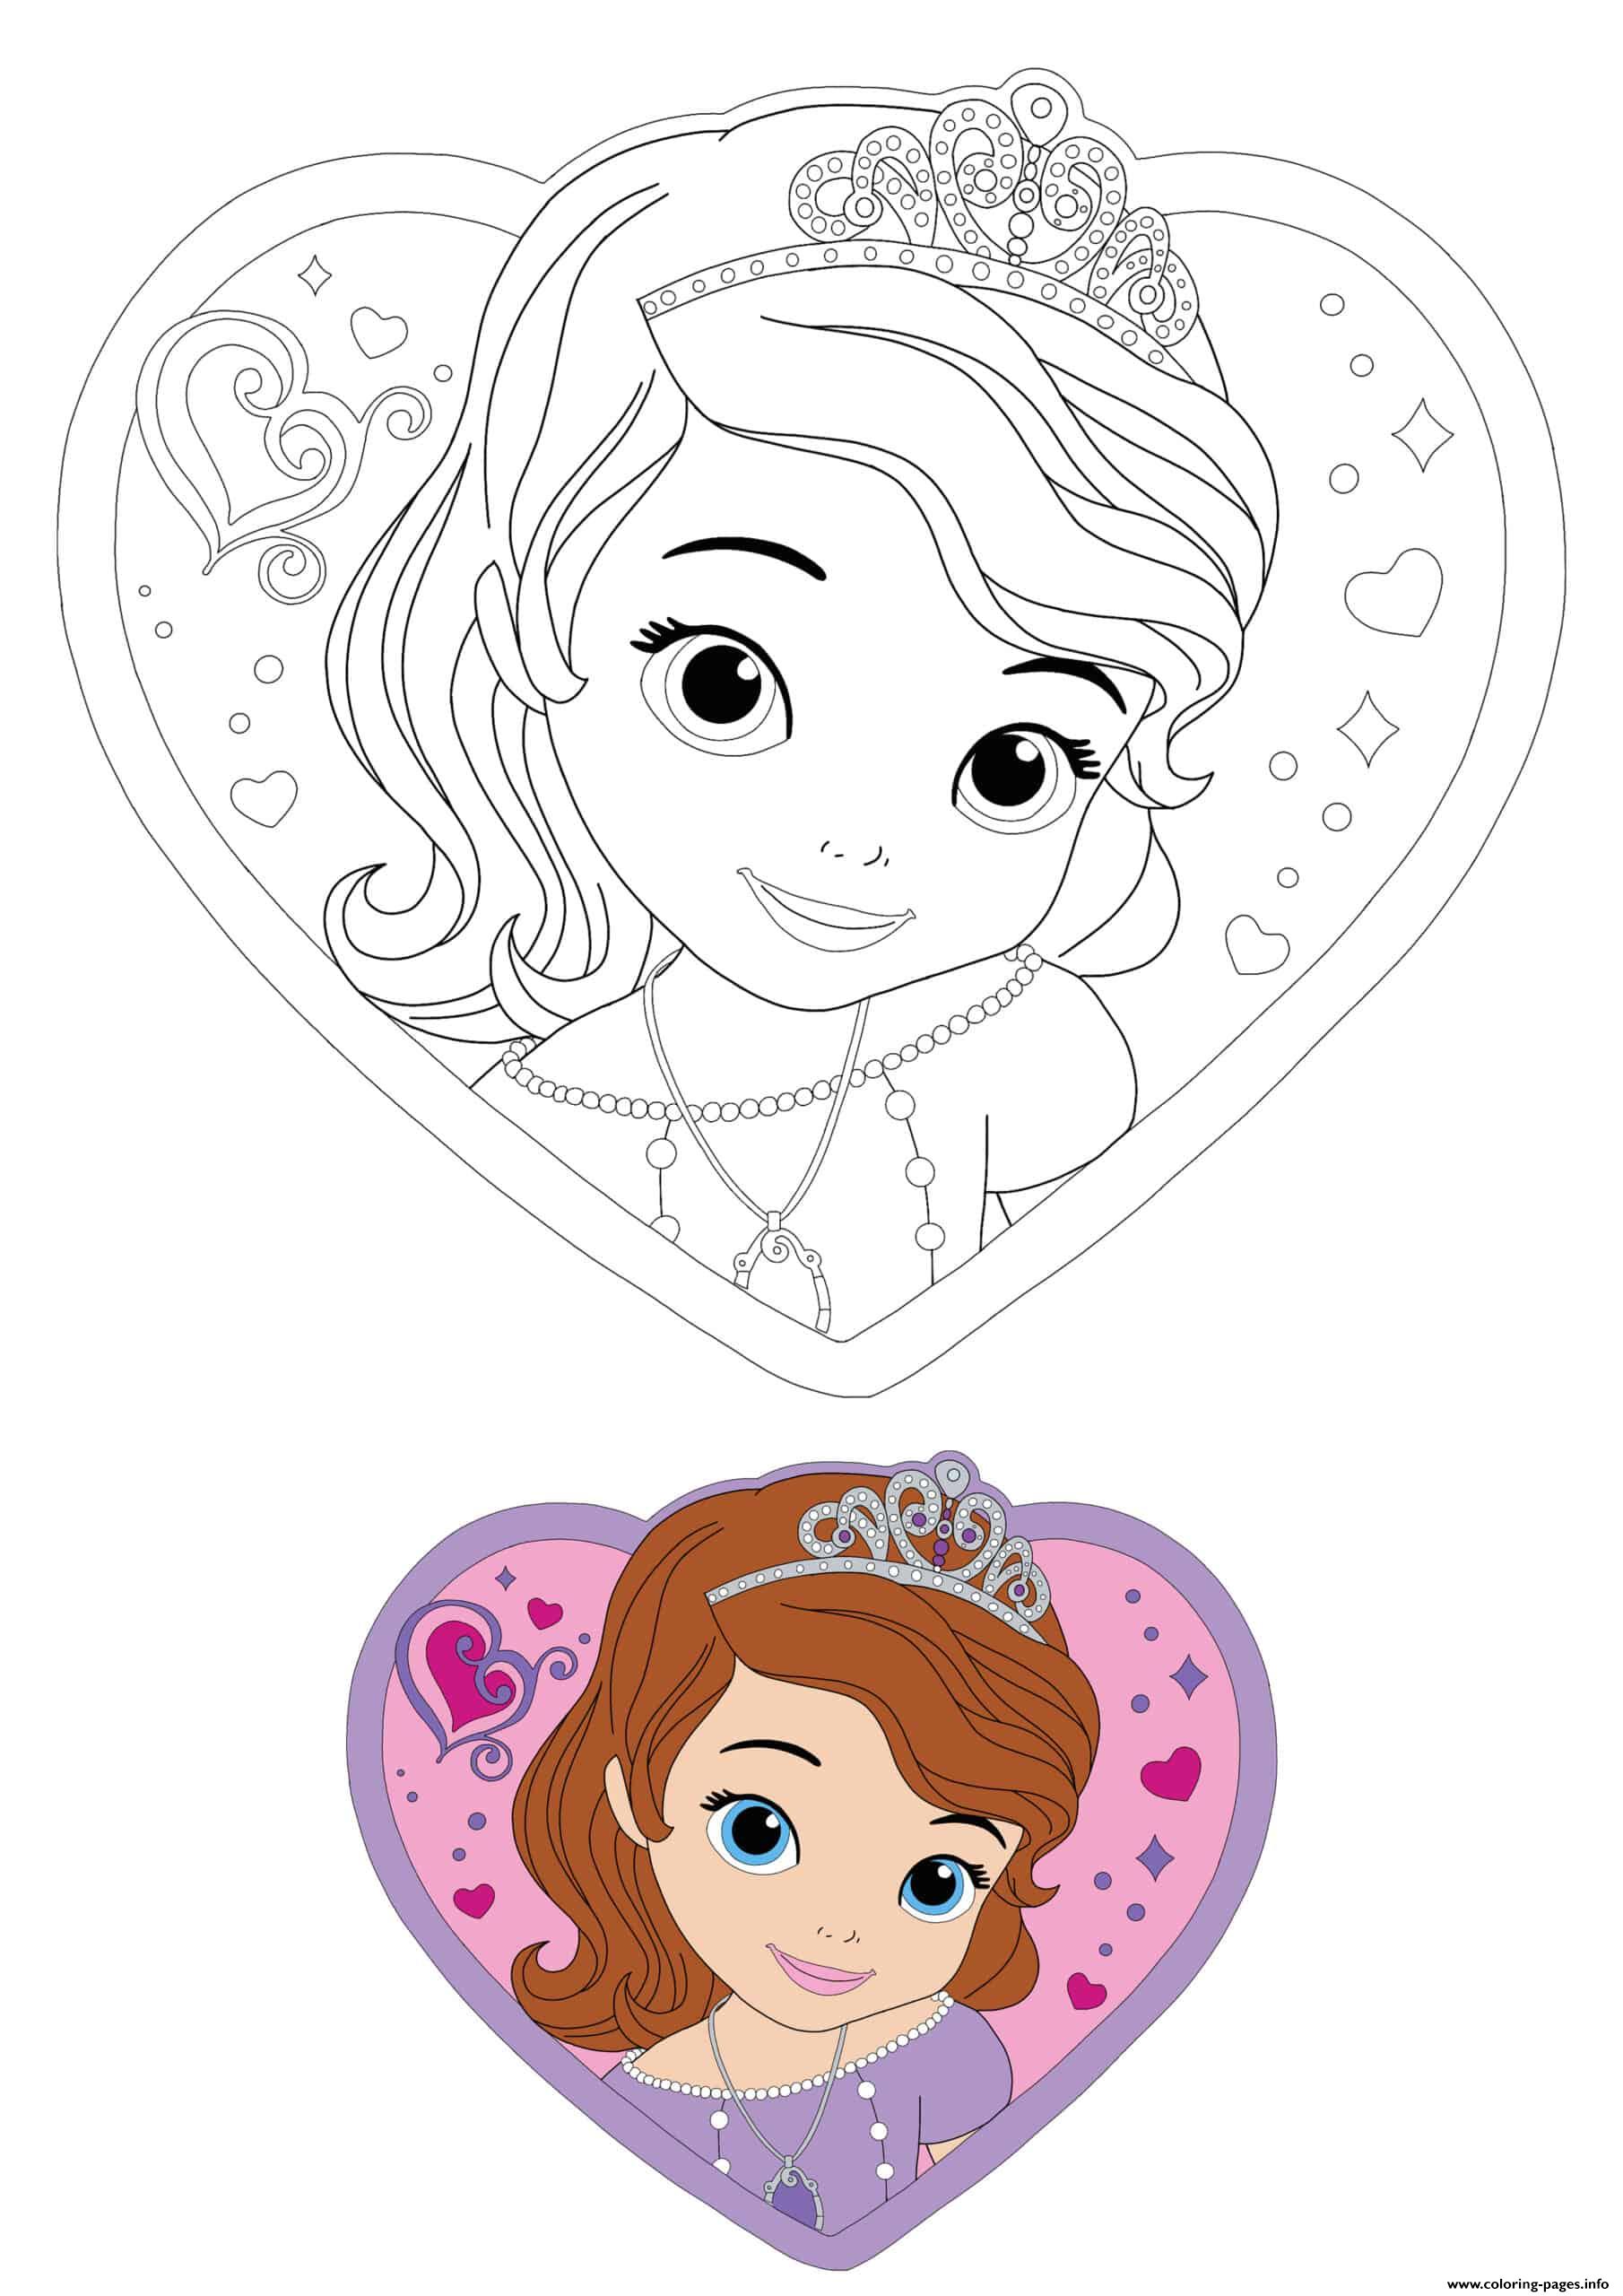 Sofia The First coloring